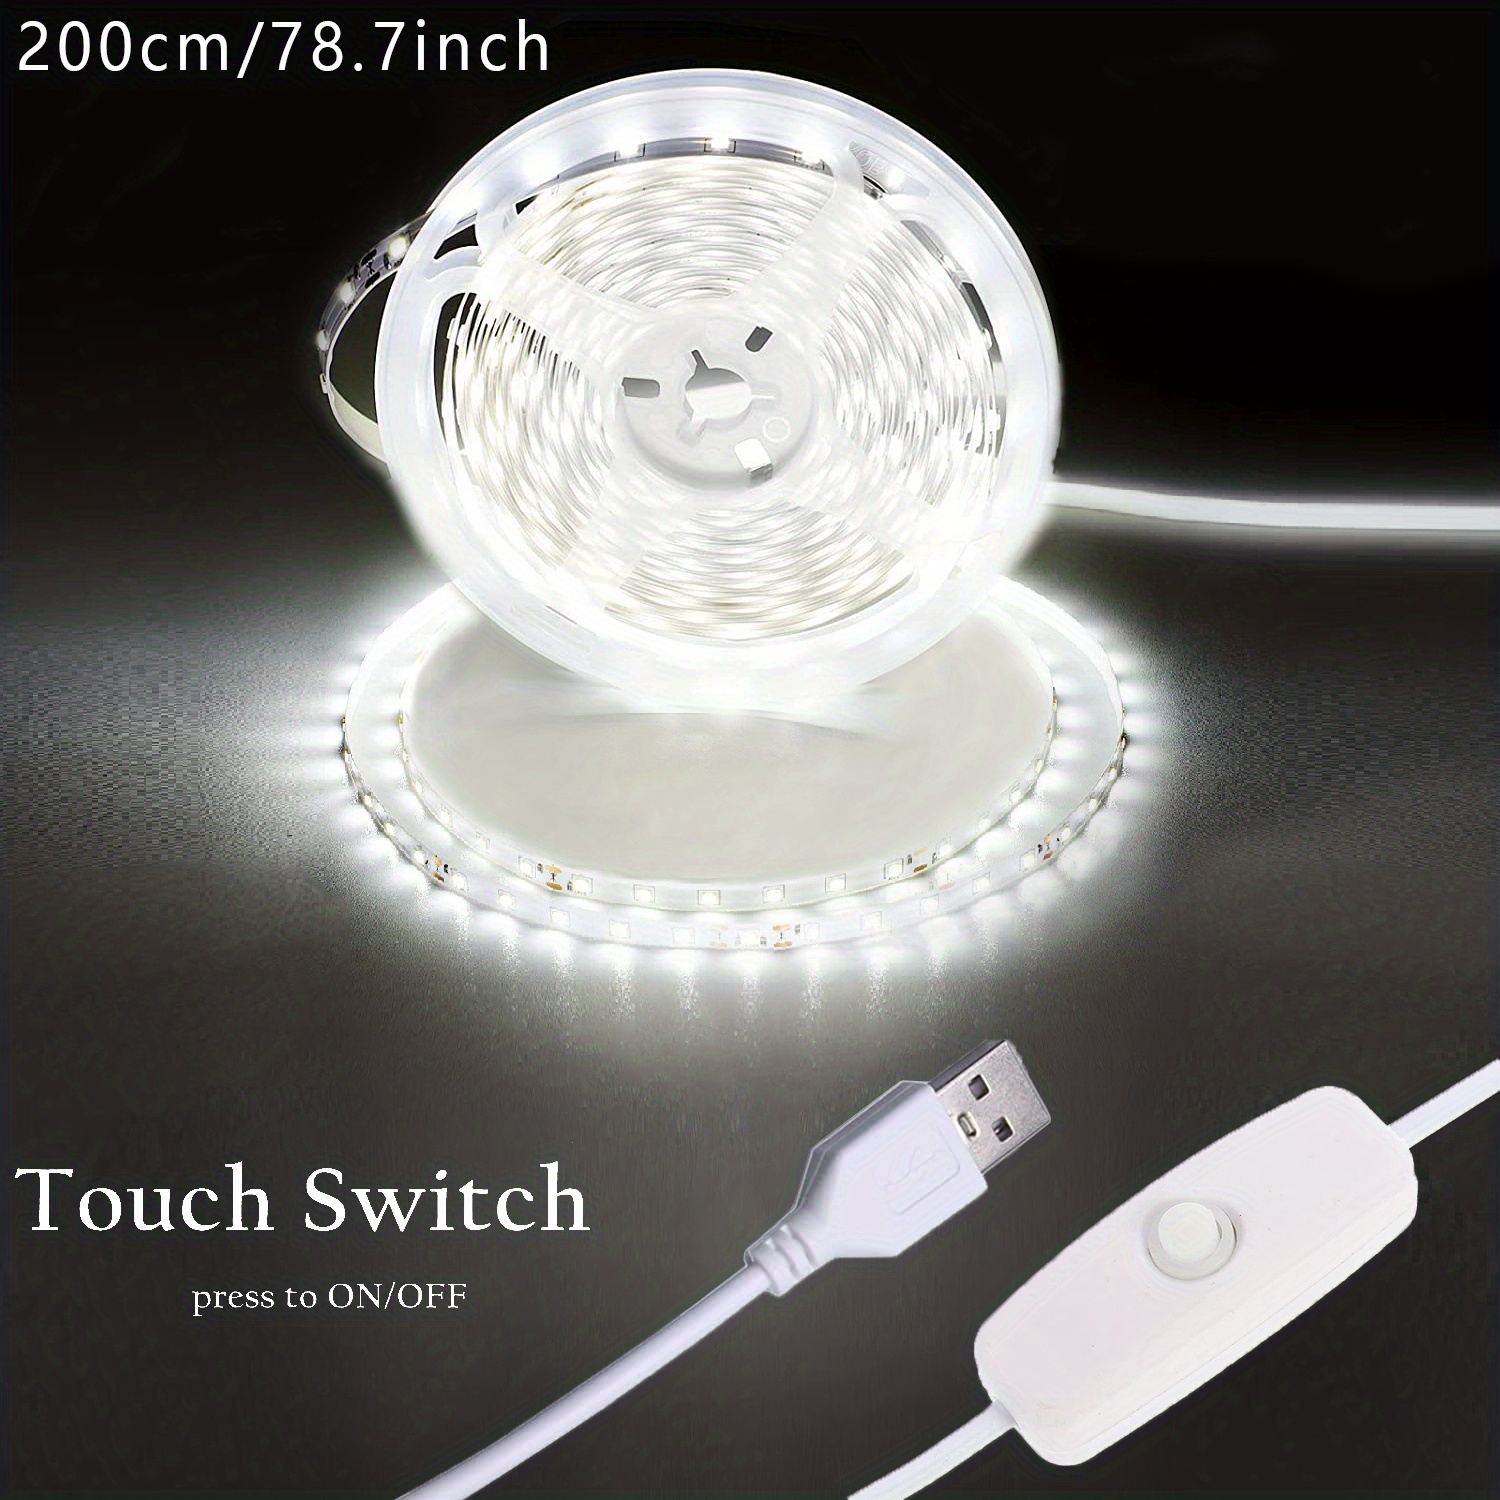 Flexible USB Usb Powered Led Strip Light With ON/OFF Switch